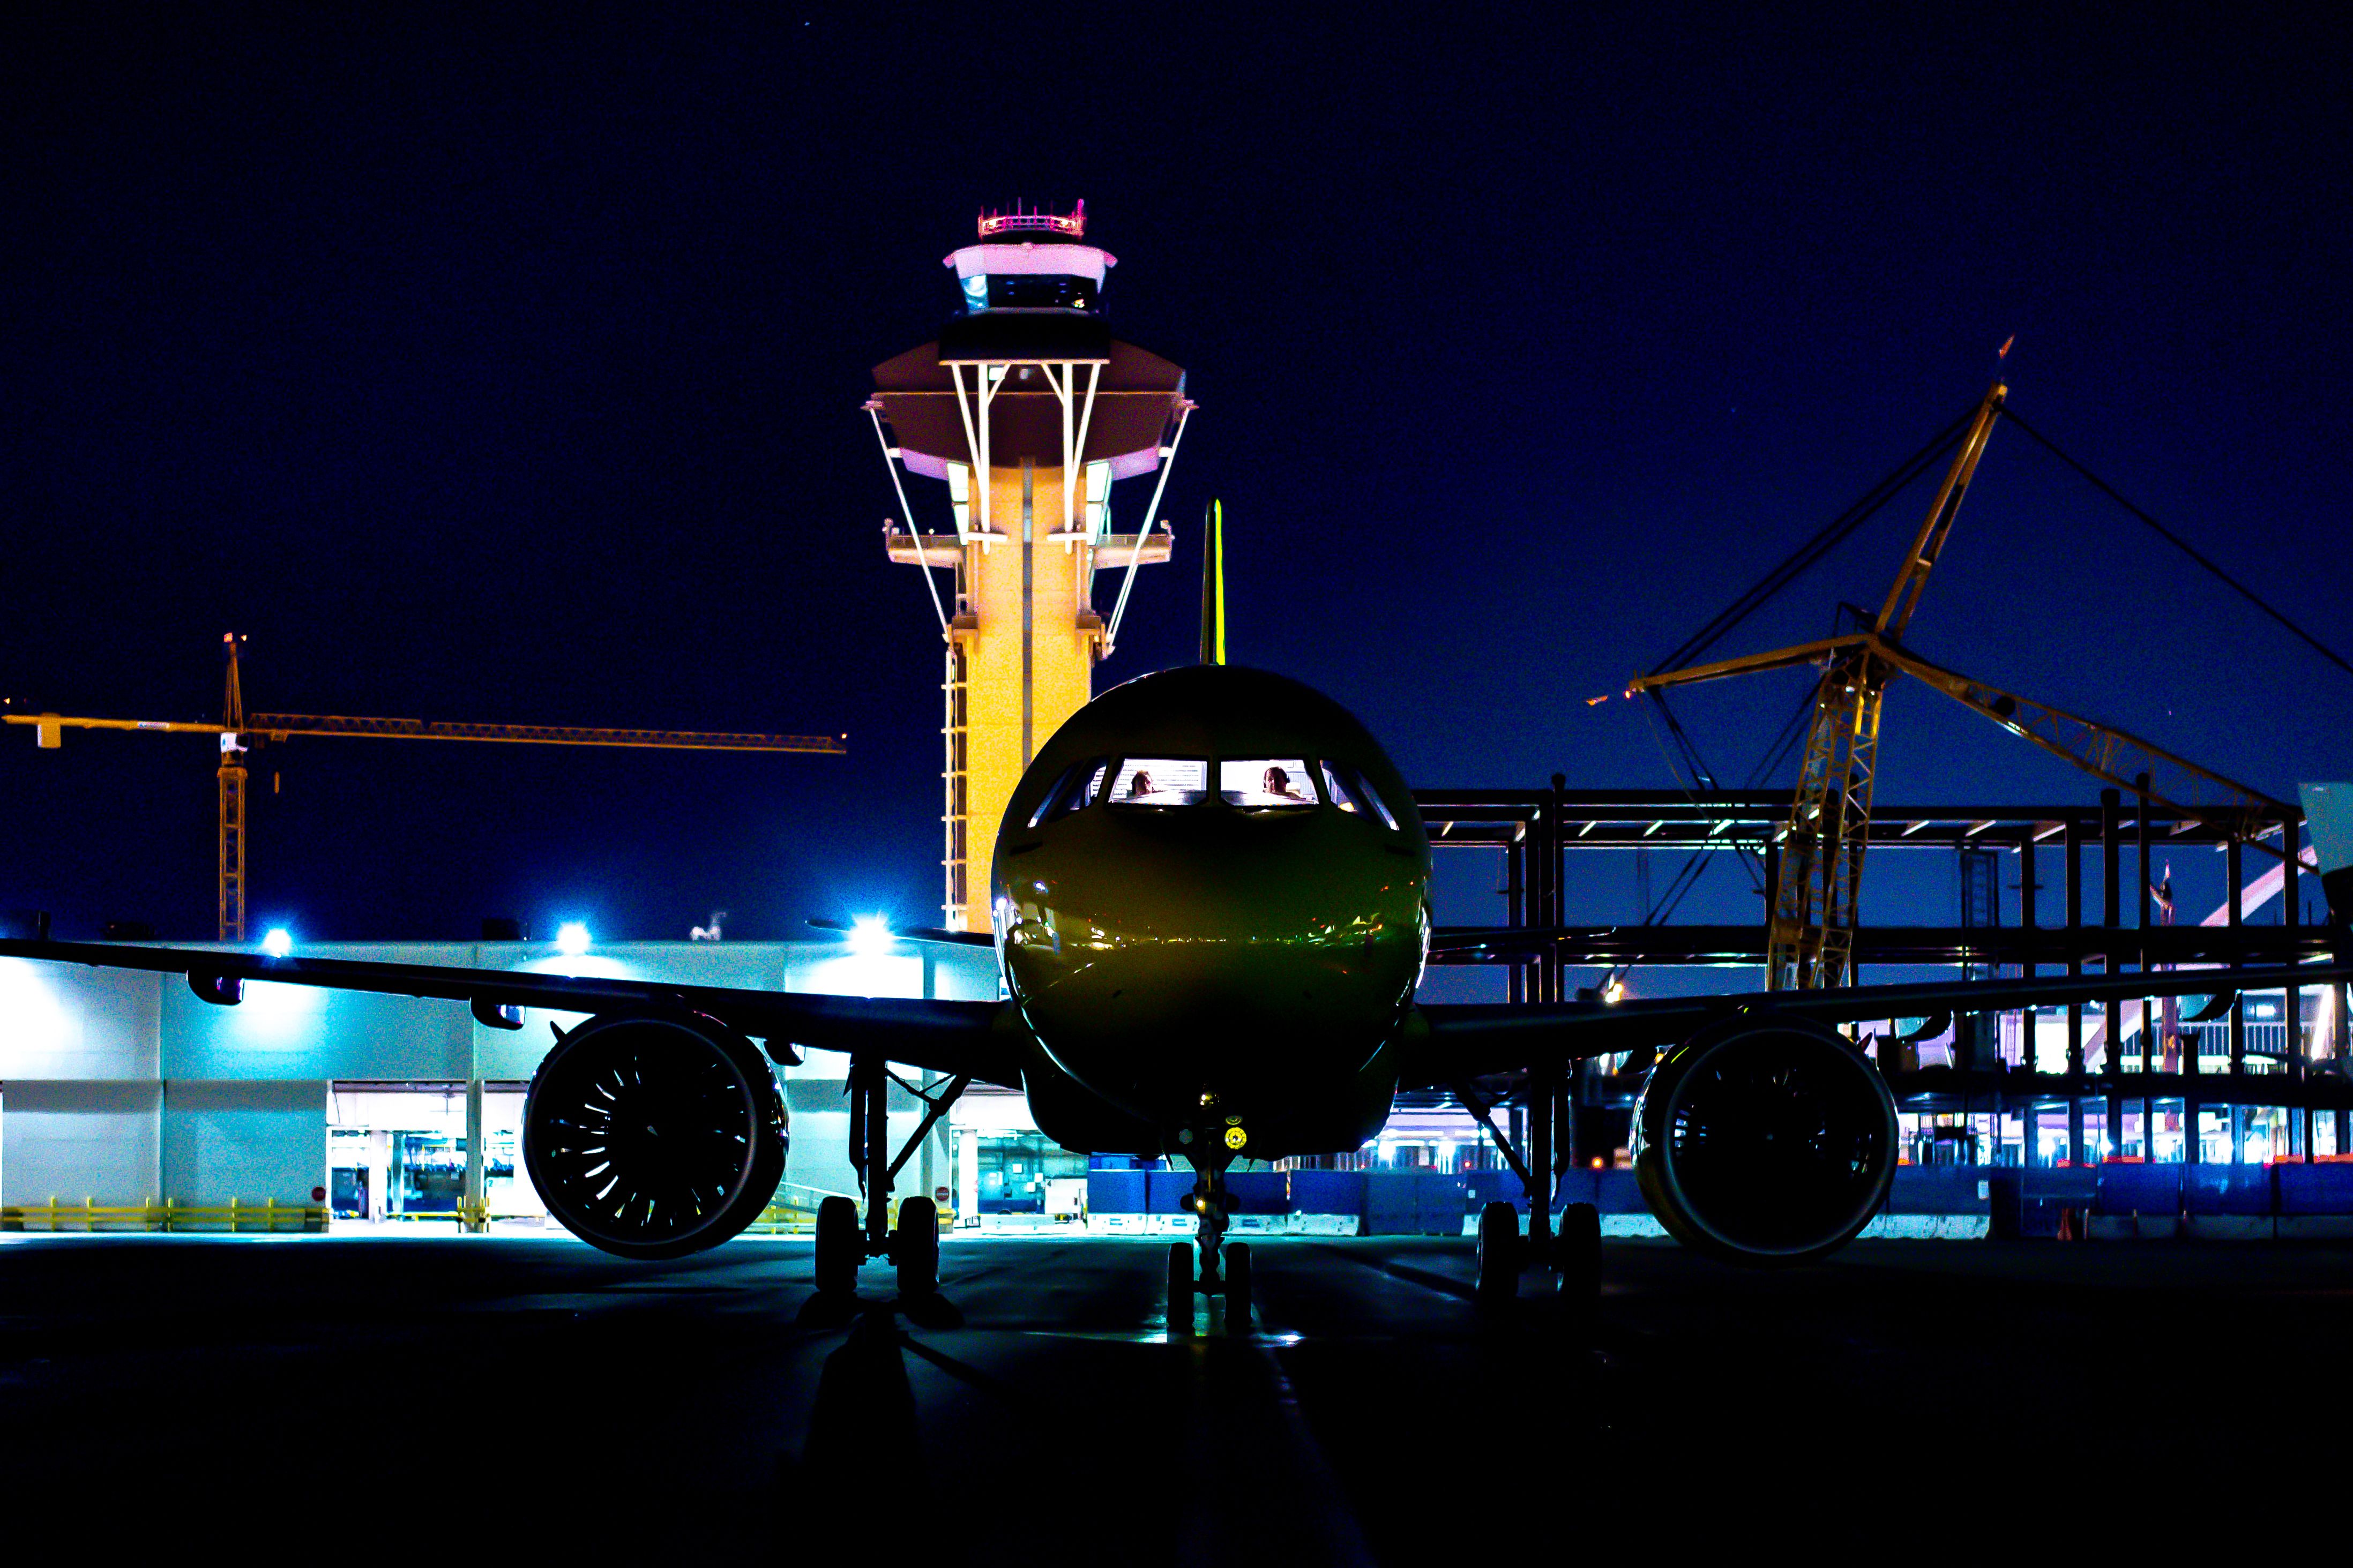 Los Angeles international airport tower with plane at night